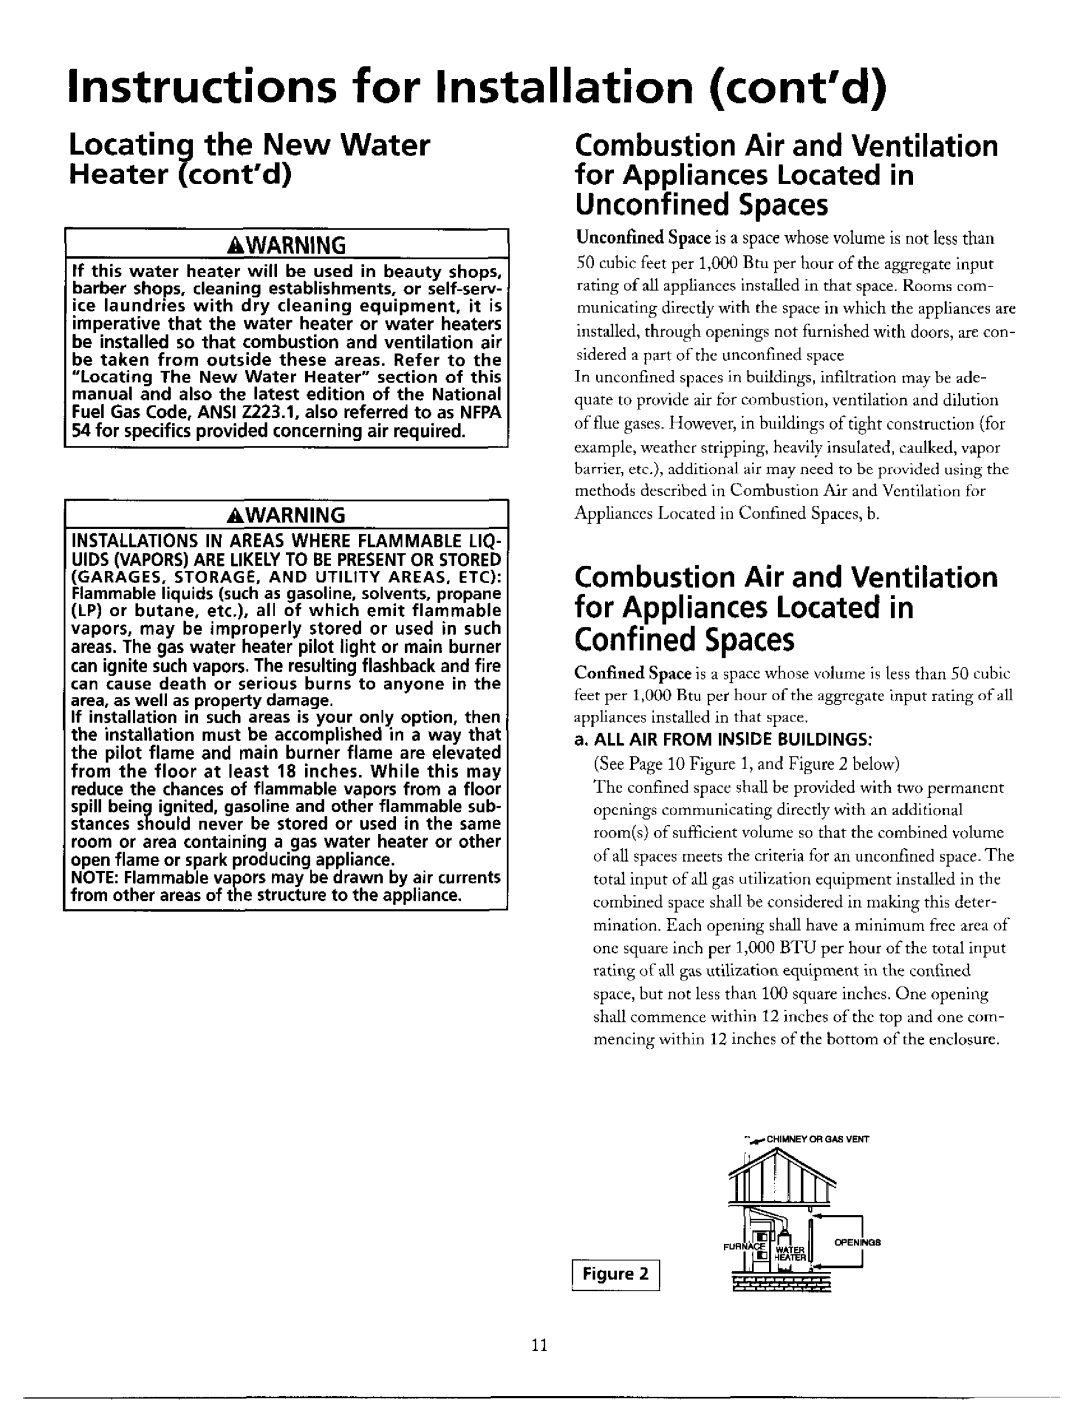 Maytag HN41240X manual Instructions, Installation contd, Locating, the New, Combustion Air and Ventilation, Heater, Water 